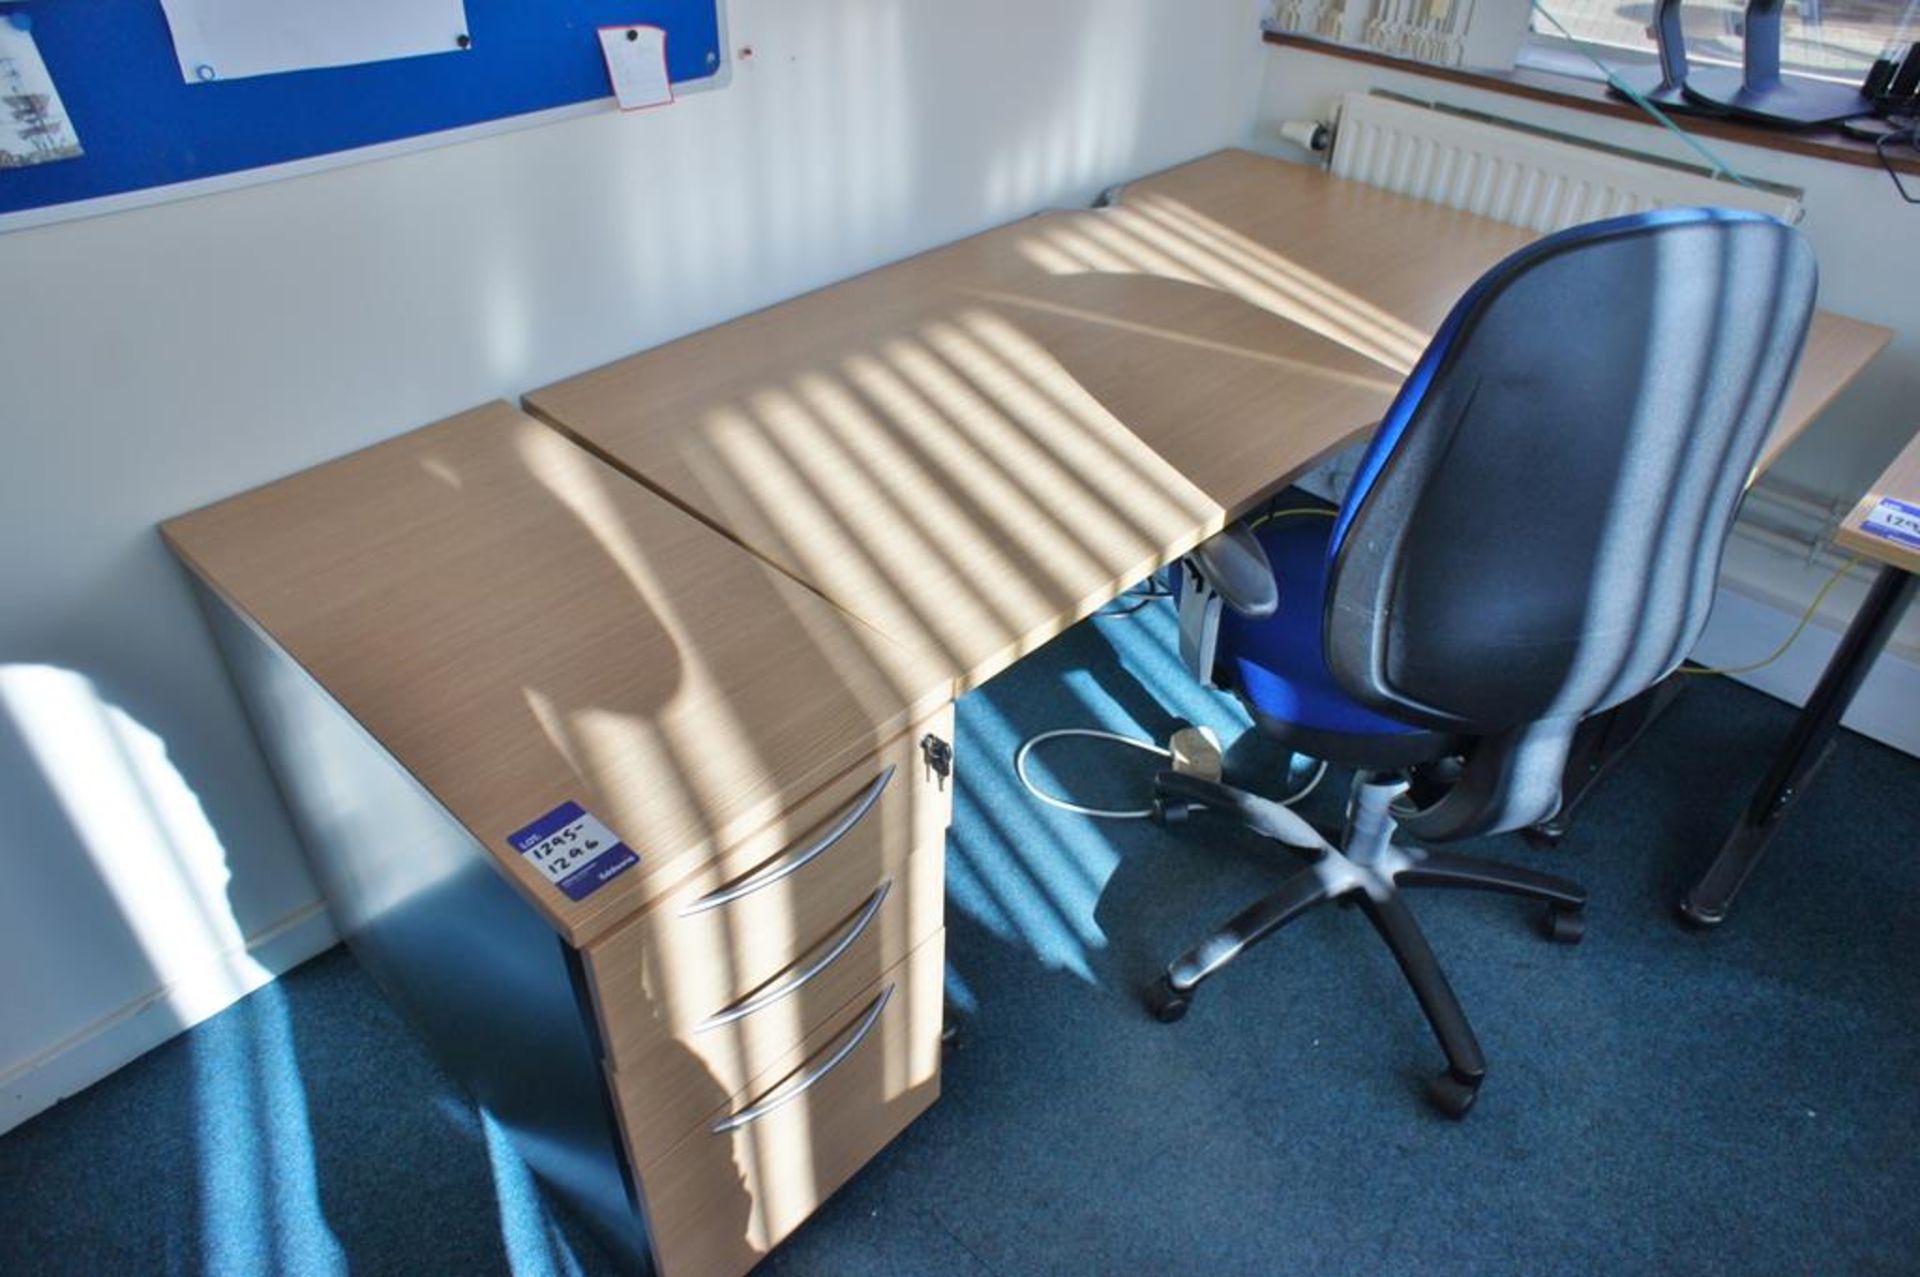 * Oak Effect R/H Radius Desk 1600 x 1200 with Desk High Pedestal and Upholstered Mobile Office Chair - Image 3 of 3